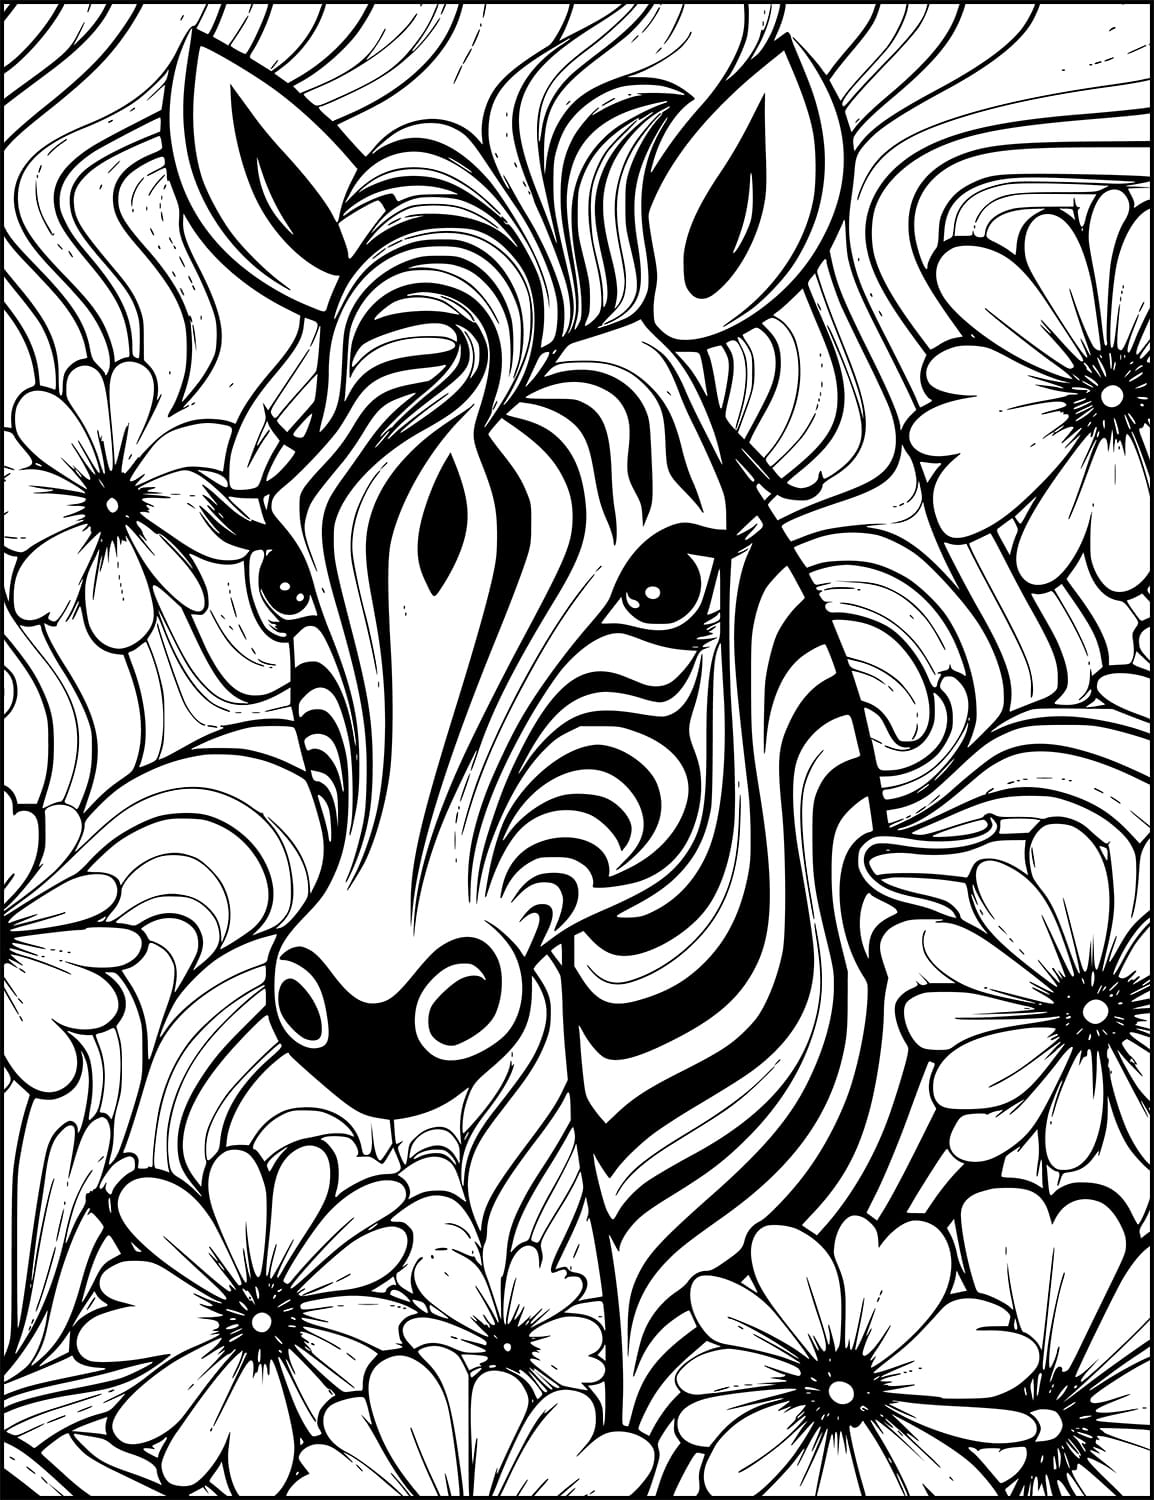 zebra mandala zentangle and zen doodle style from animals and flowers adult coloring book